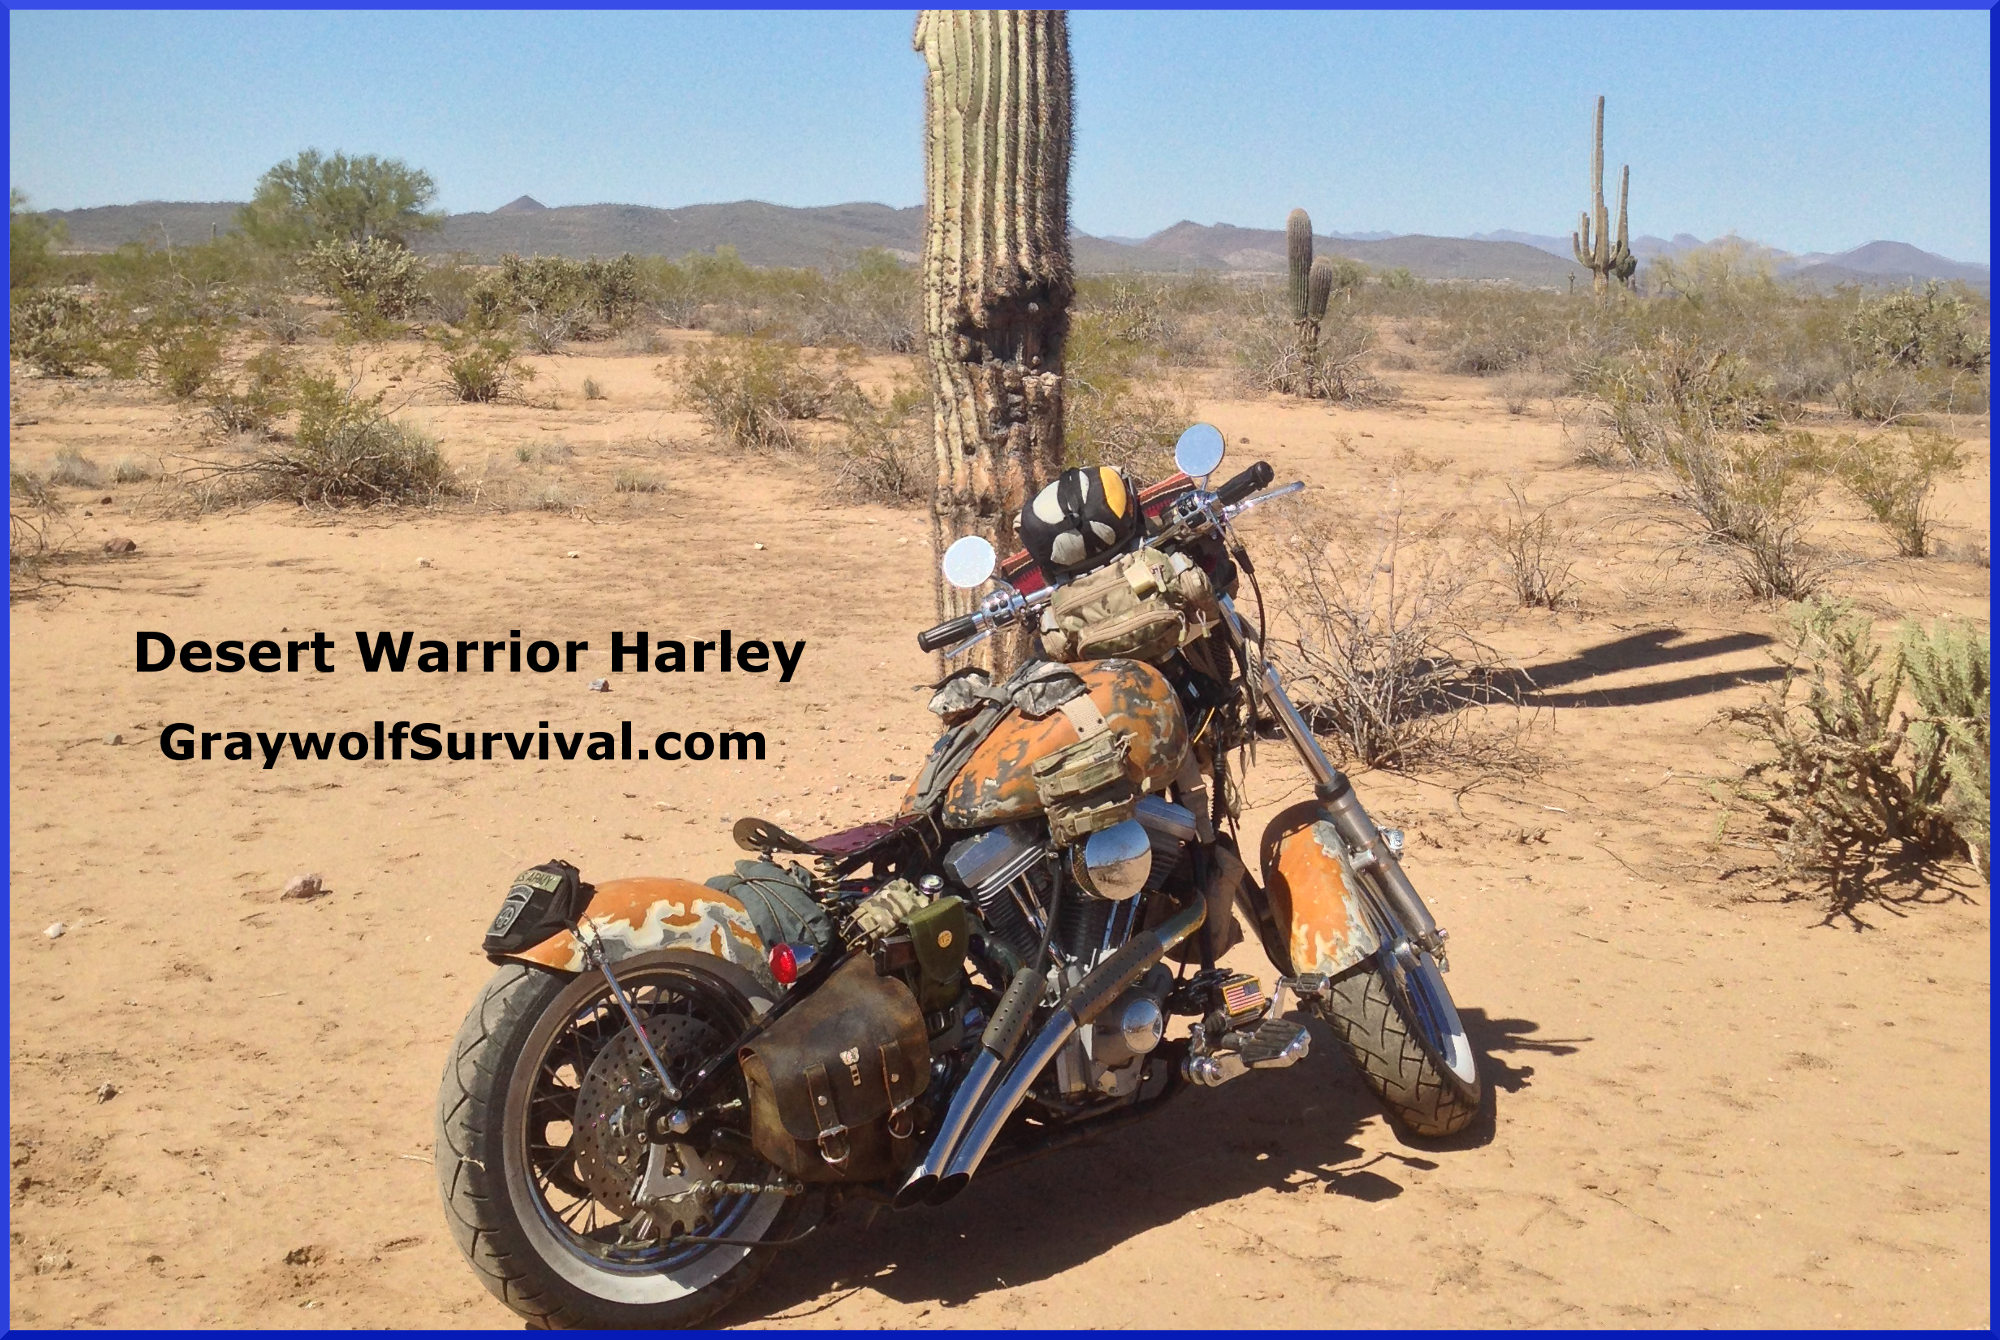 Check Out the Desert Warrior Harley SHTF Motorcycle